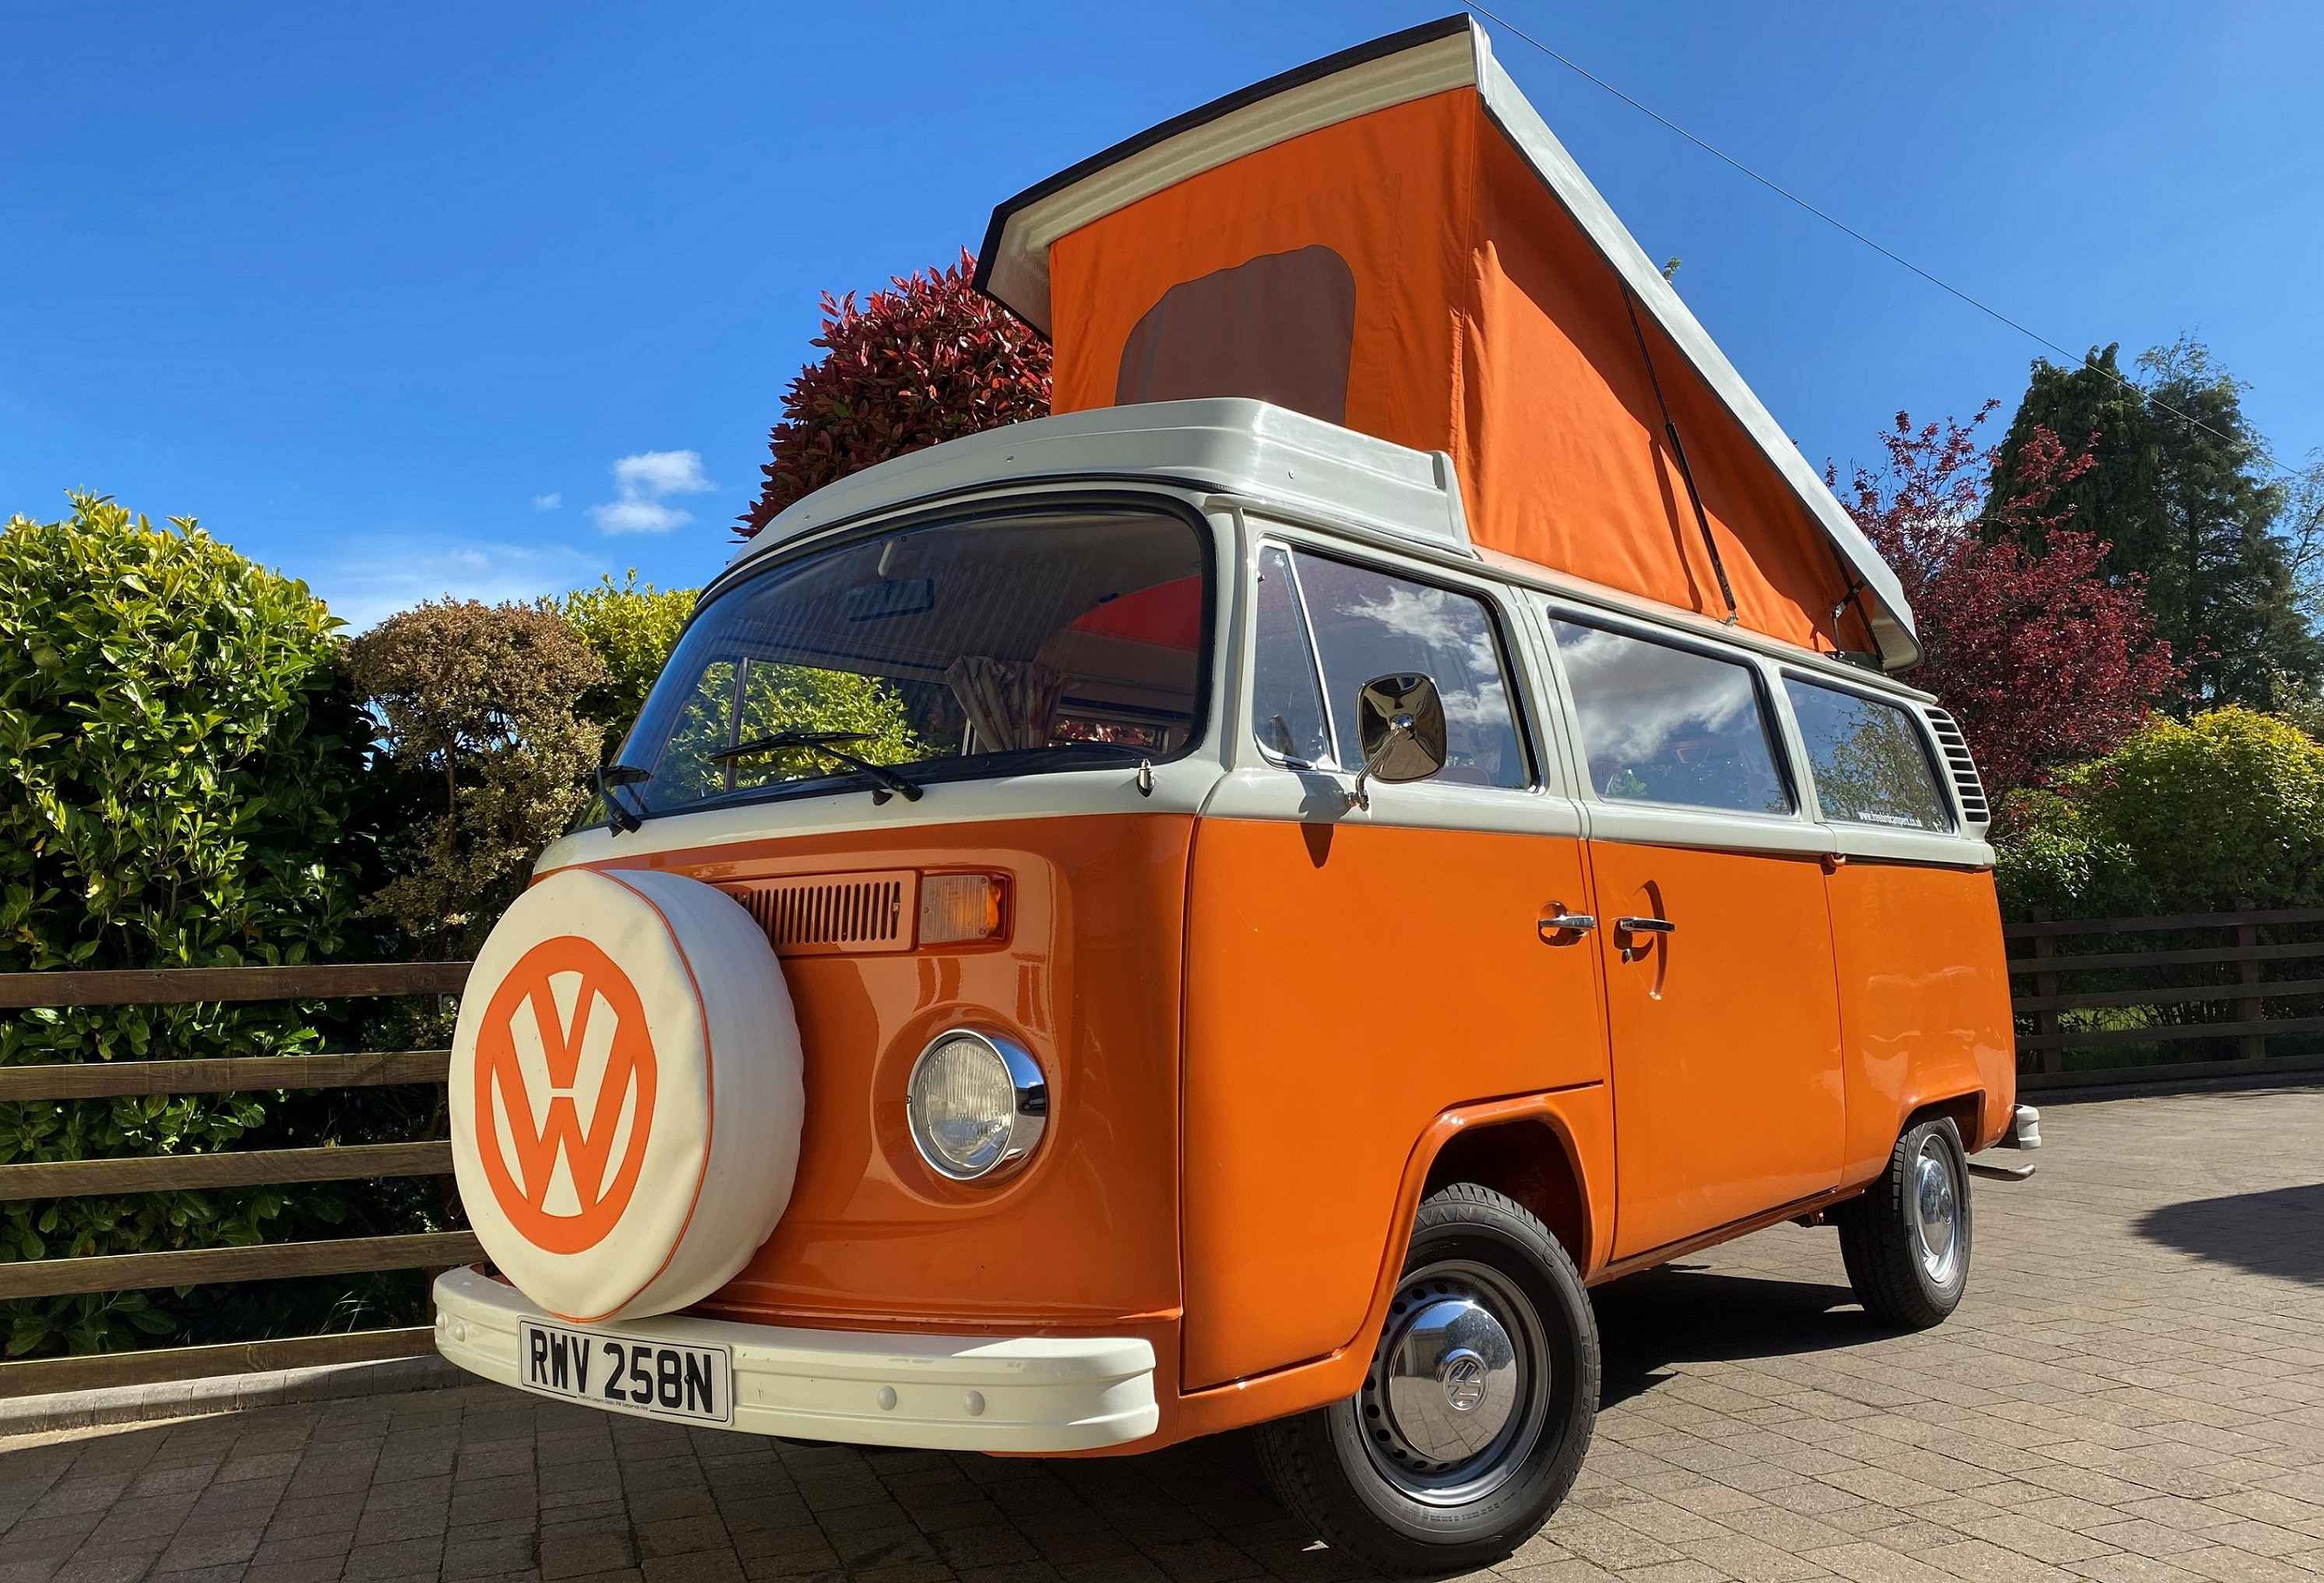 A  Campervan called Funky-Bob and VW Campervan Funky Bob for hire in Devon for hire in Colyton, Devon